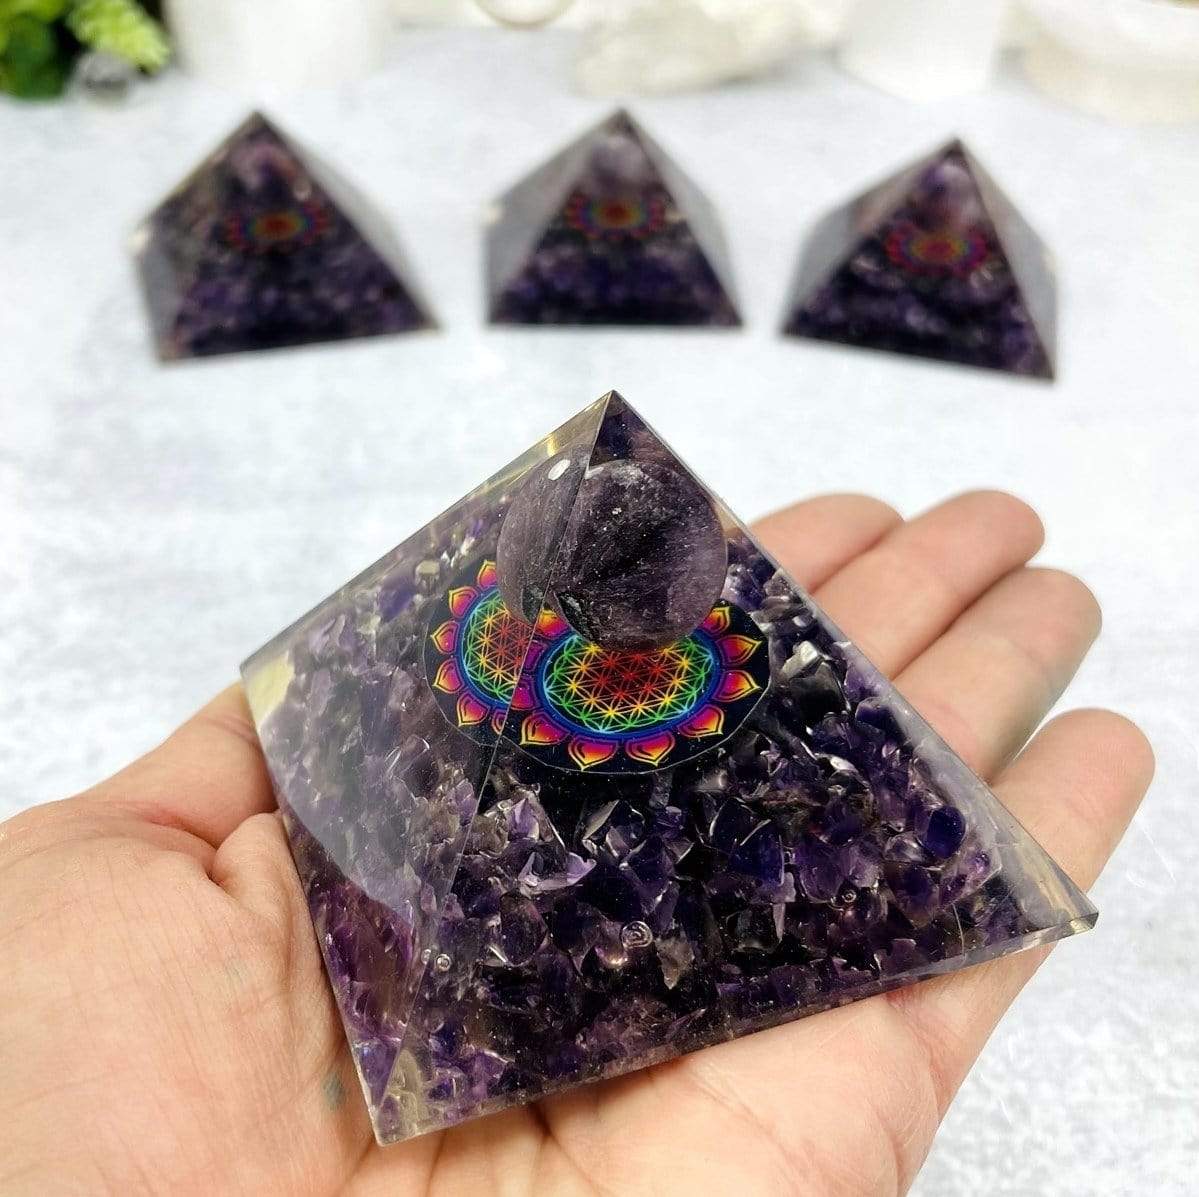 4 Orgone Amethyst Pyramids with Flower of Life Medallion, 1 up close in a hand and the others behind